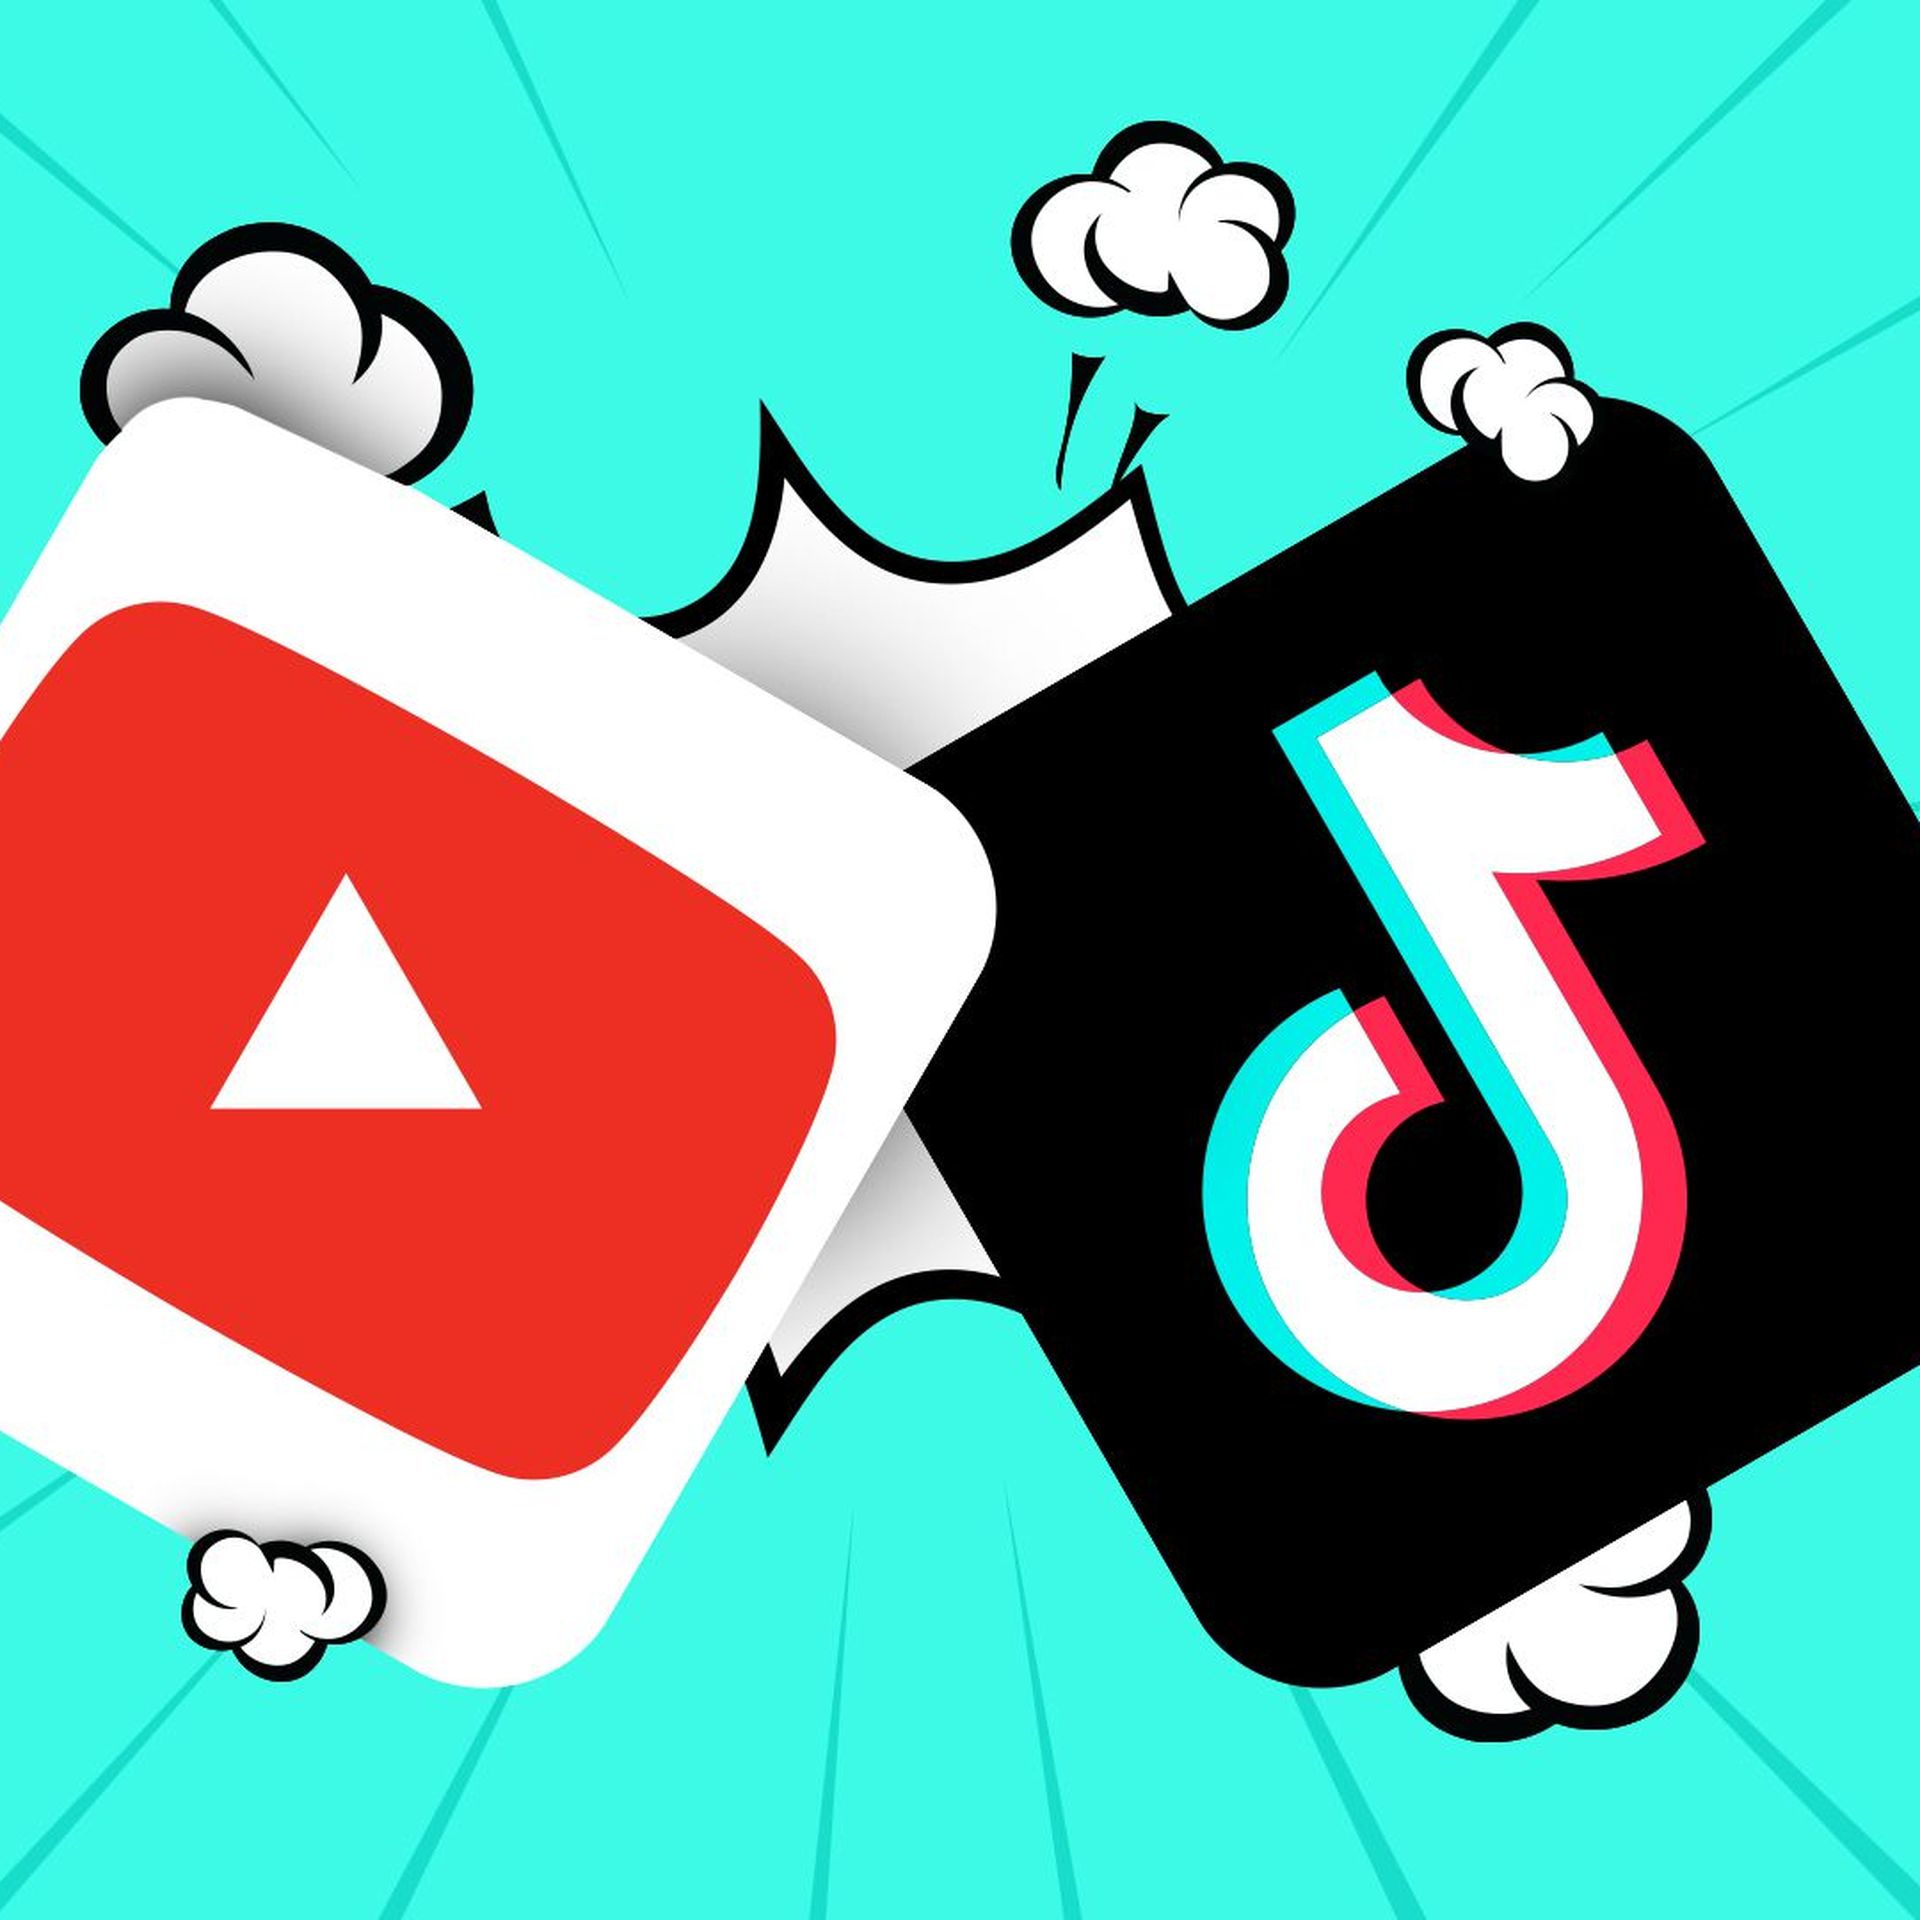 Illustration of the Youtube and TikTok app logos battling in a comic book style. 